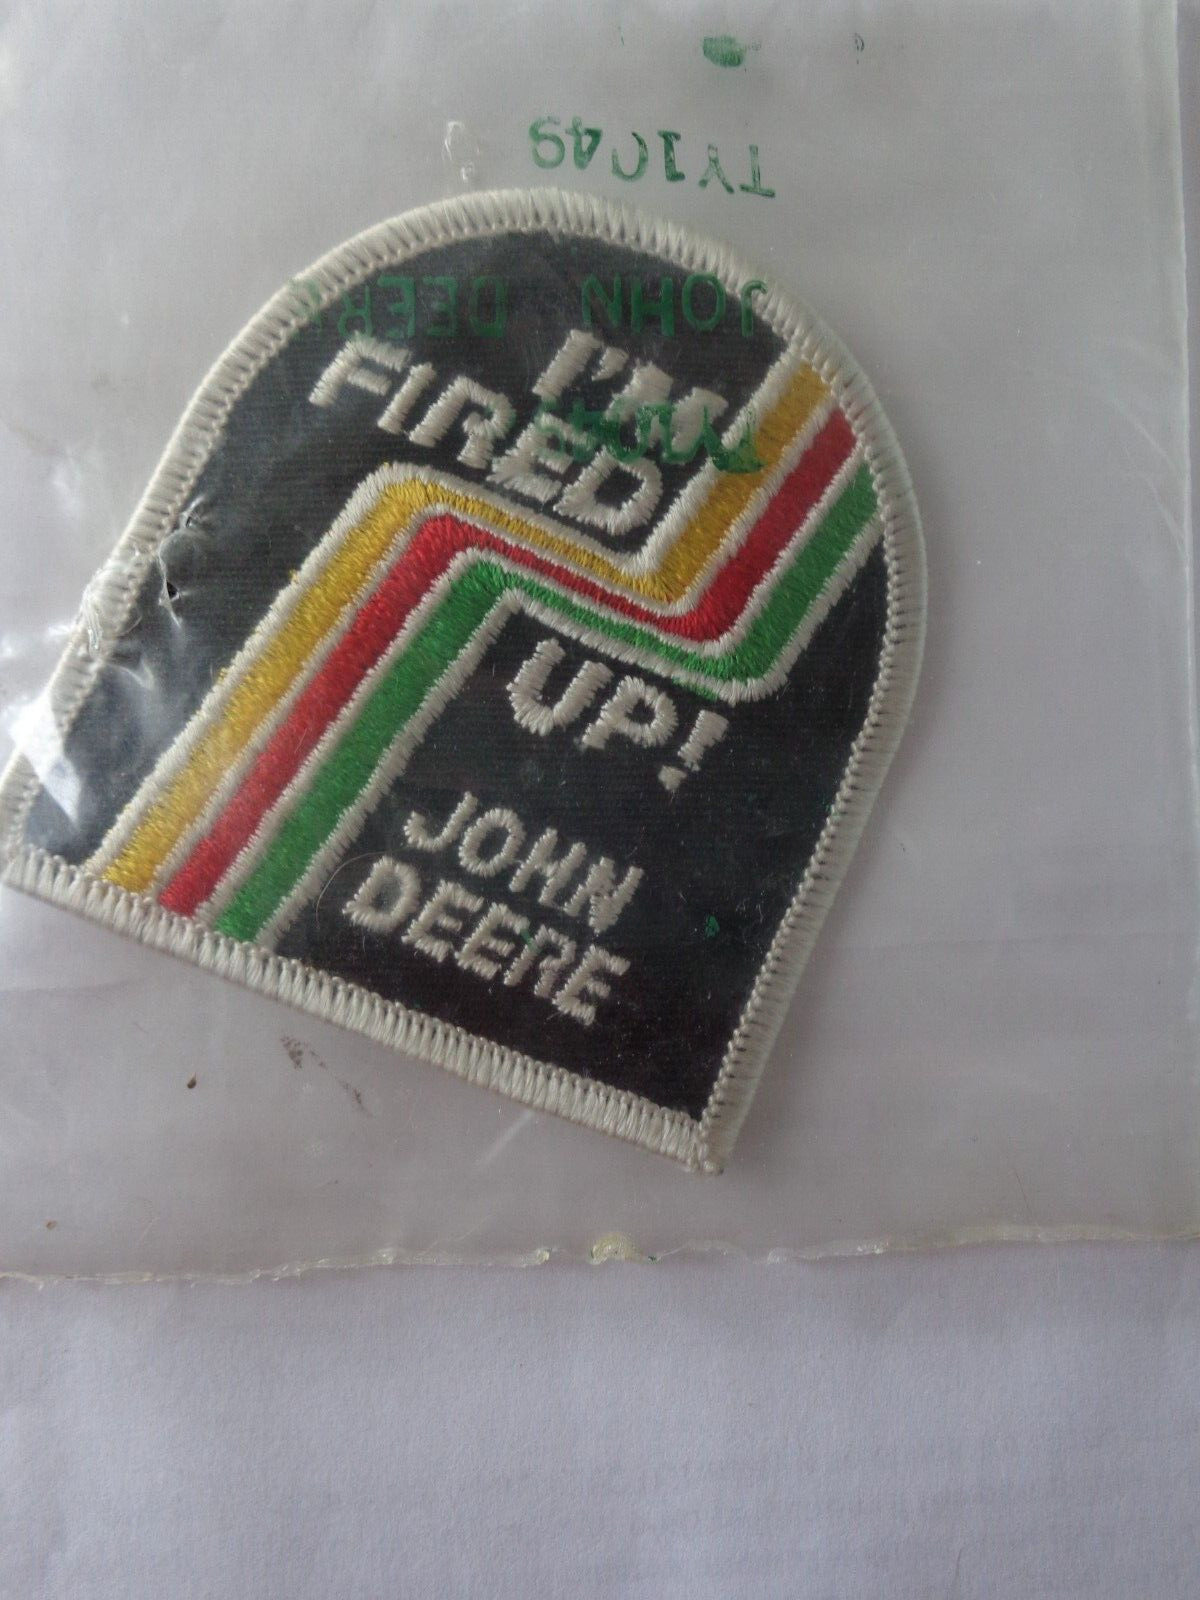 John Deere Vintage Snowmobile Patch.  I'm Fired Up